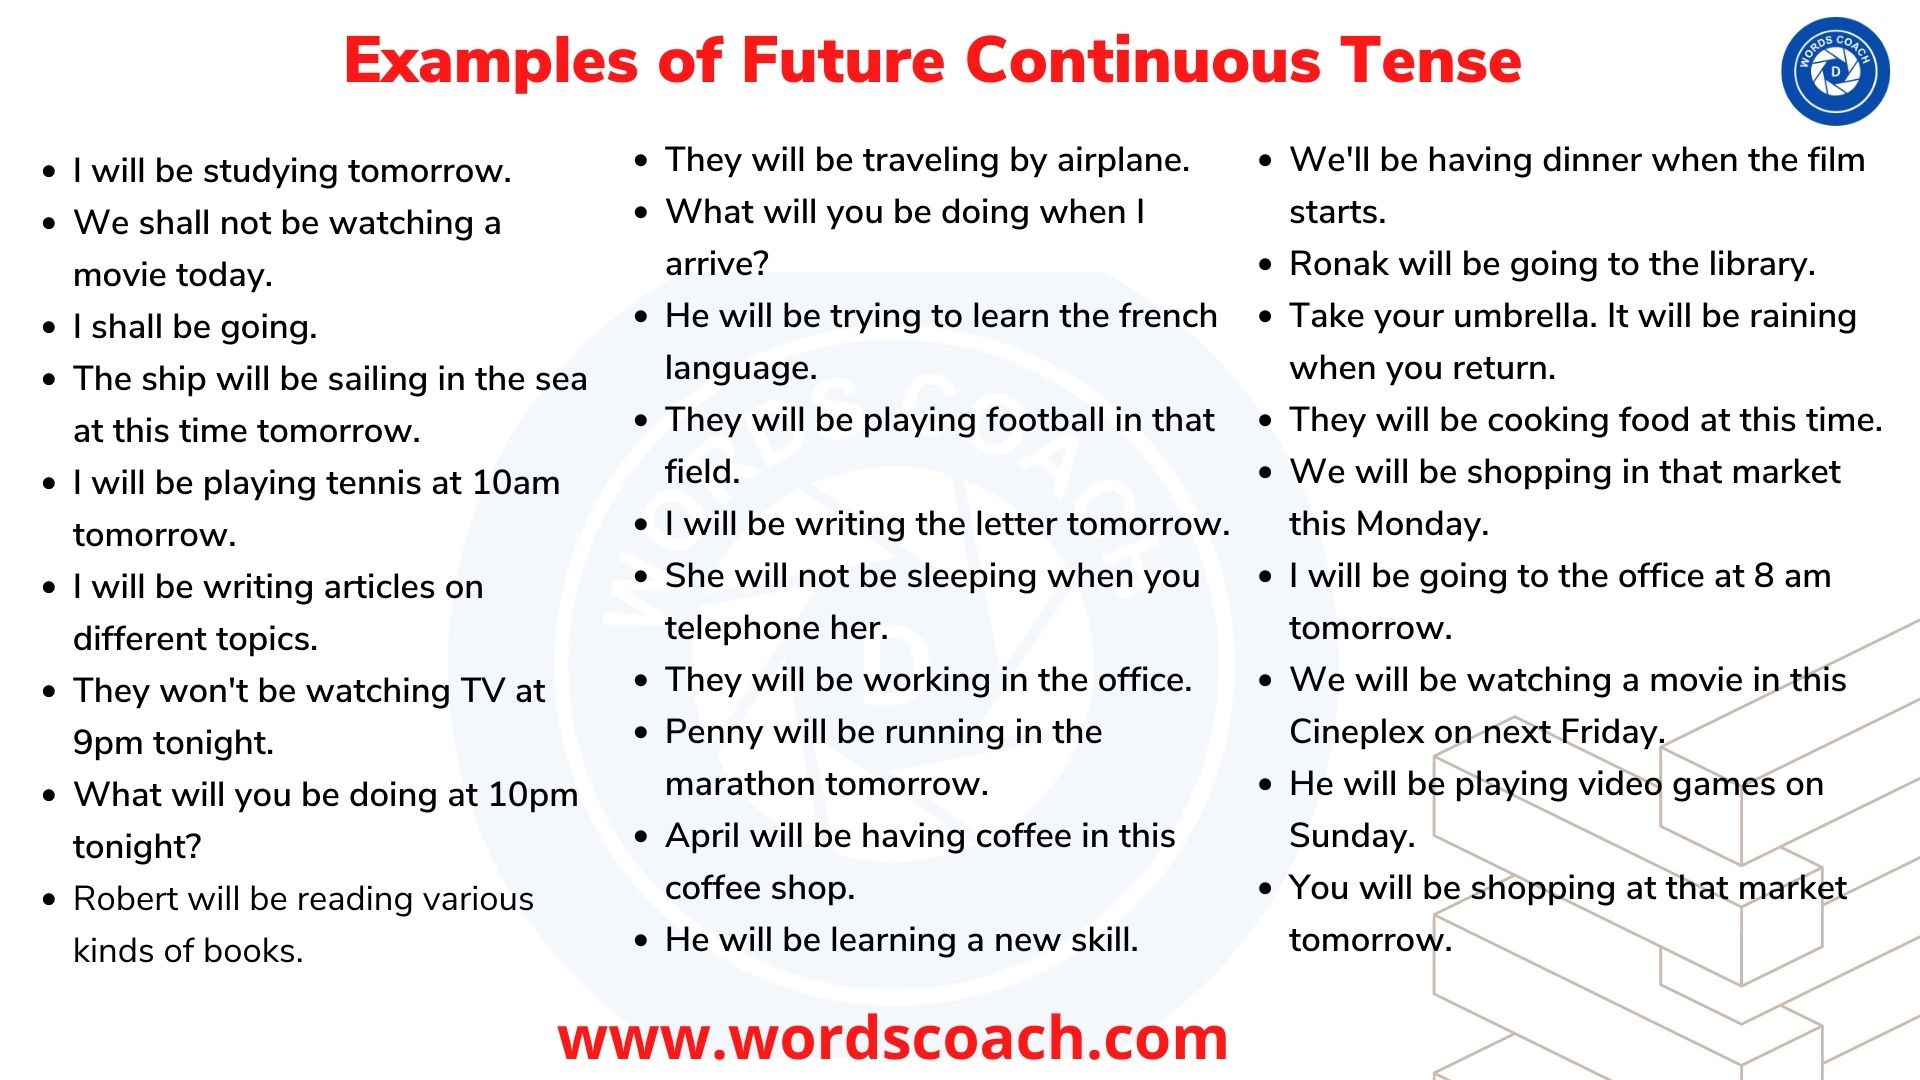 Examples of Future Continuous Tense